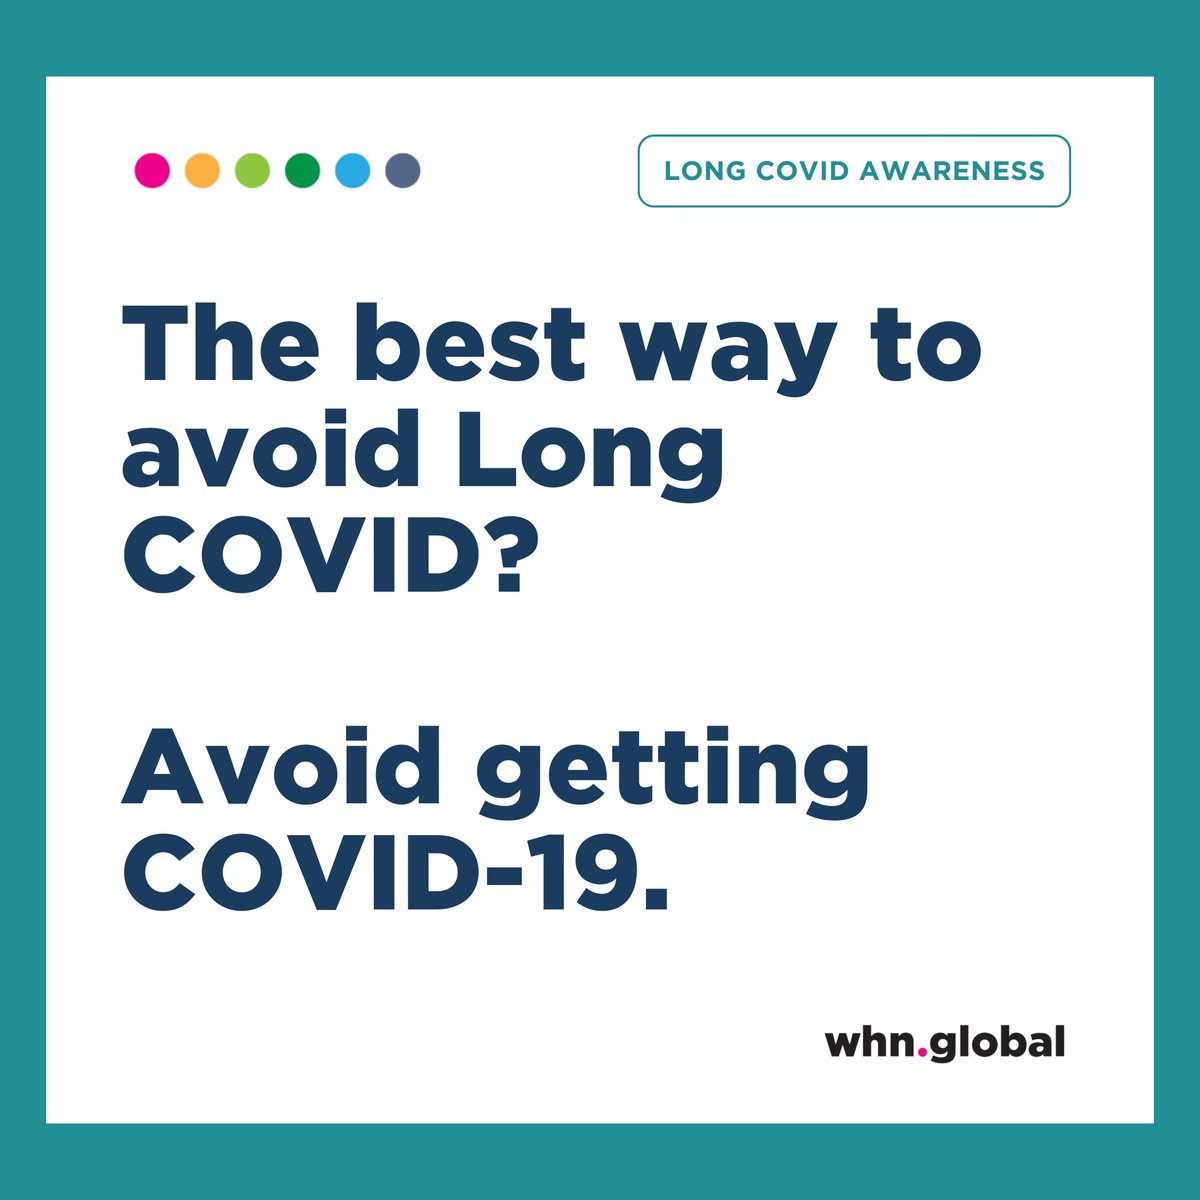 COVID-19 can have long-term effects on your health even after the initial infection has cleared. The best way to avoid Long COVID is to avoid getting COVID-19. Visit our website to learn more about Long COVID: whn.global/long-covid/ #LongCOVID #COVID19Prevention #PublicHealth